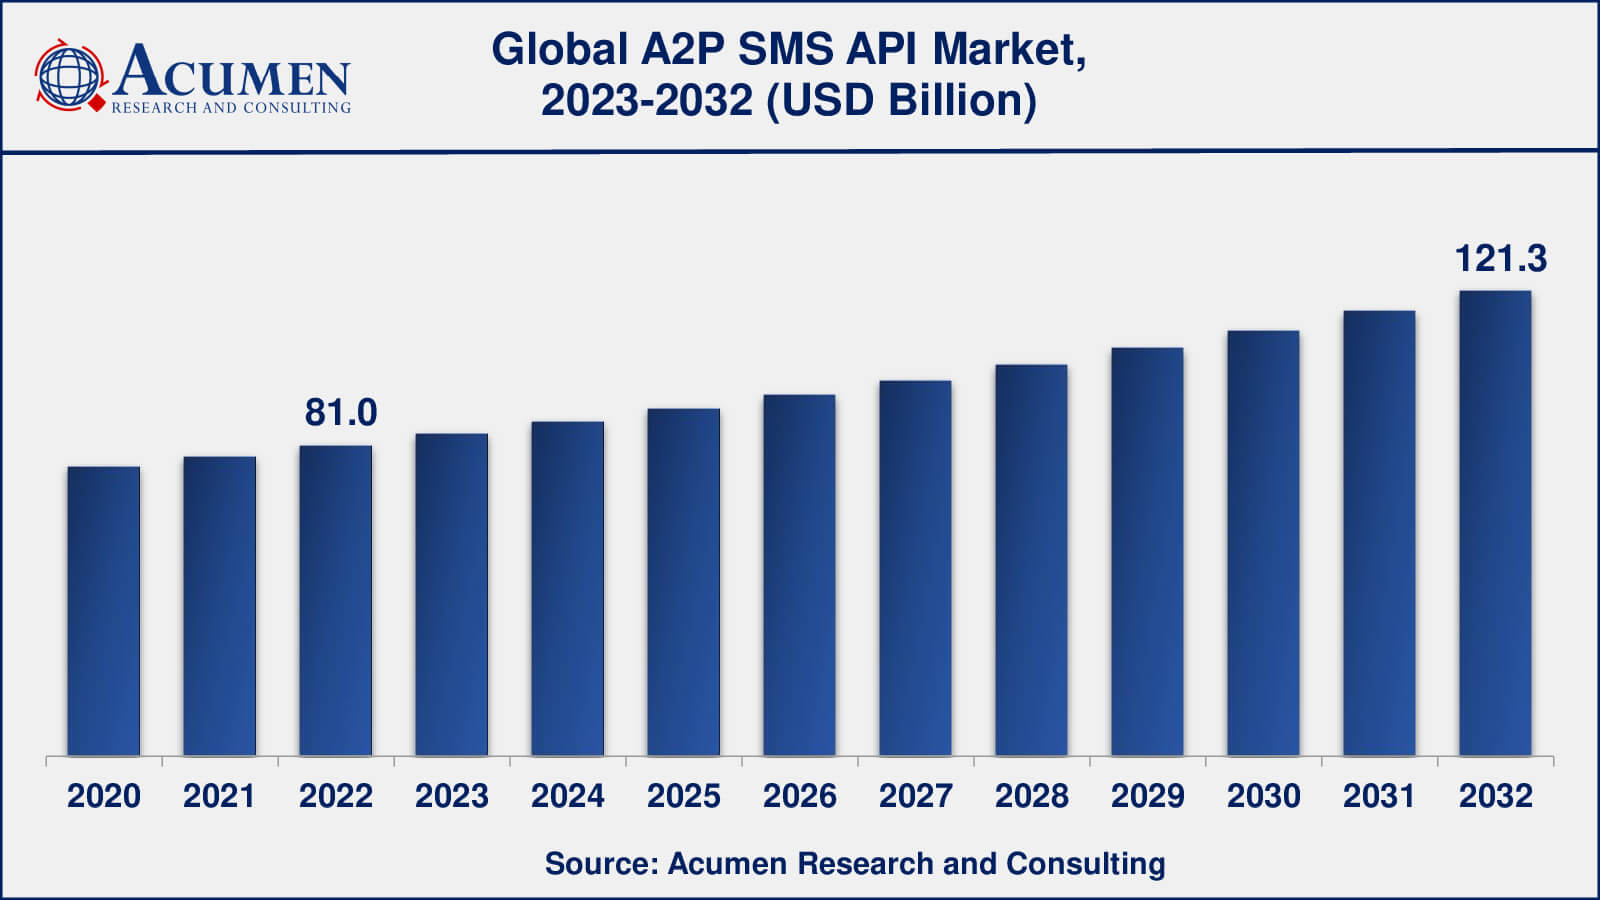 Global Application-to-Person (A2P) SMS API Market Dynamics